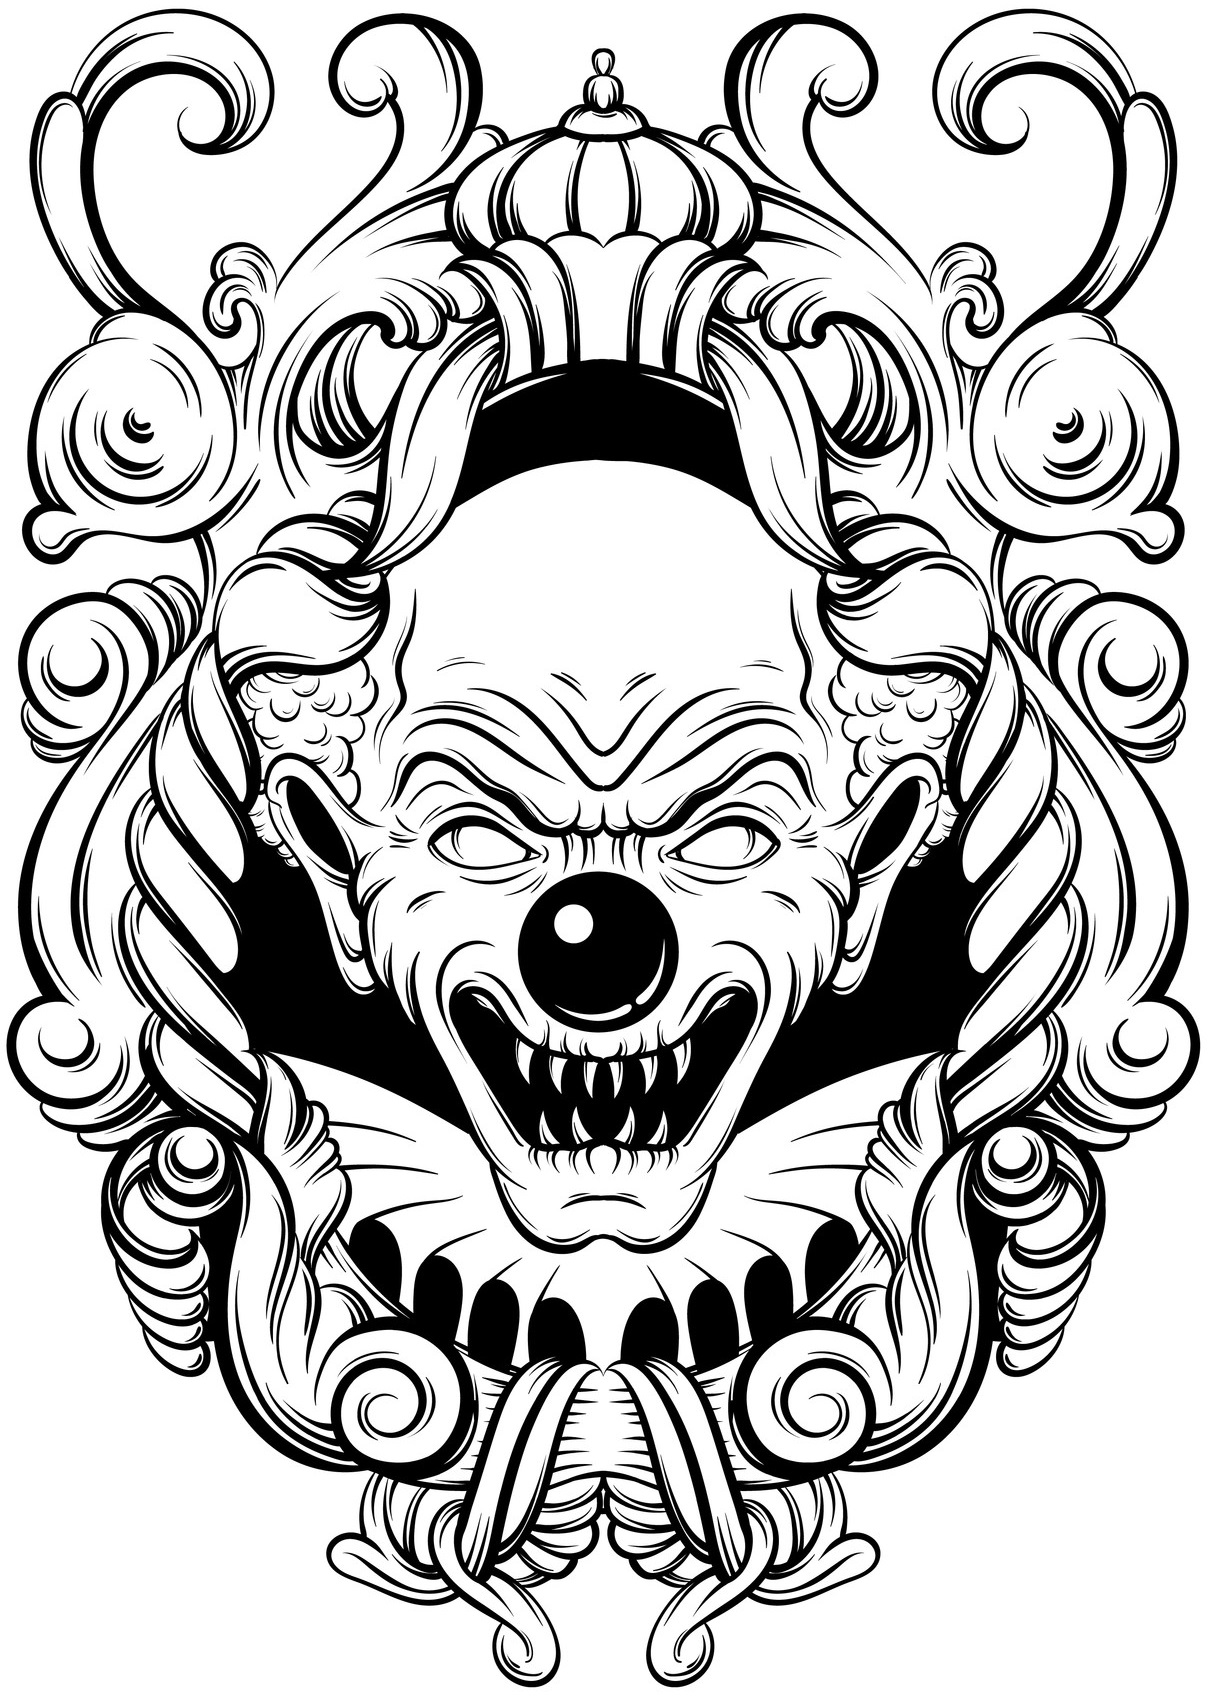 Psycho Killer Clowns Coloring Book For Kids 9 And Teenagers Home